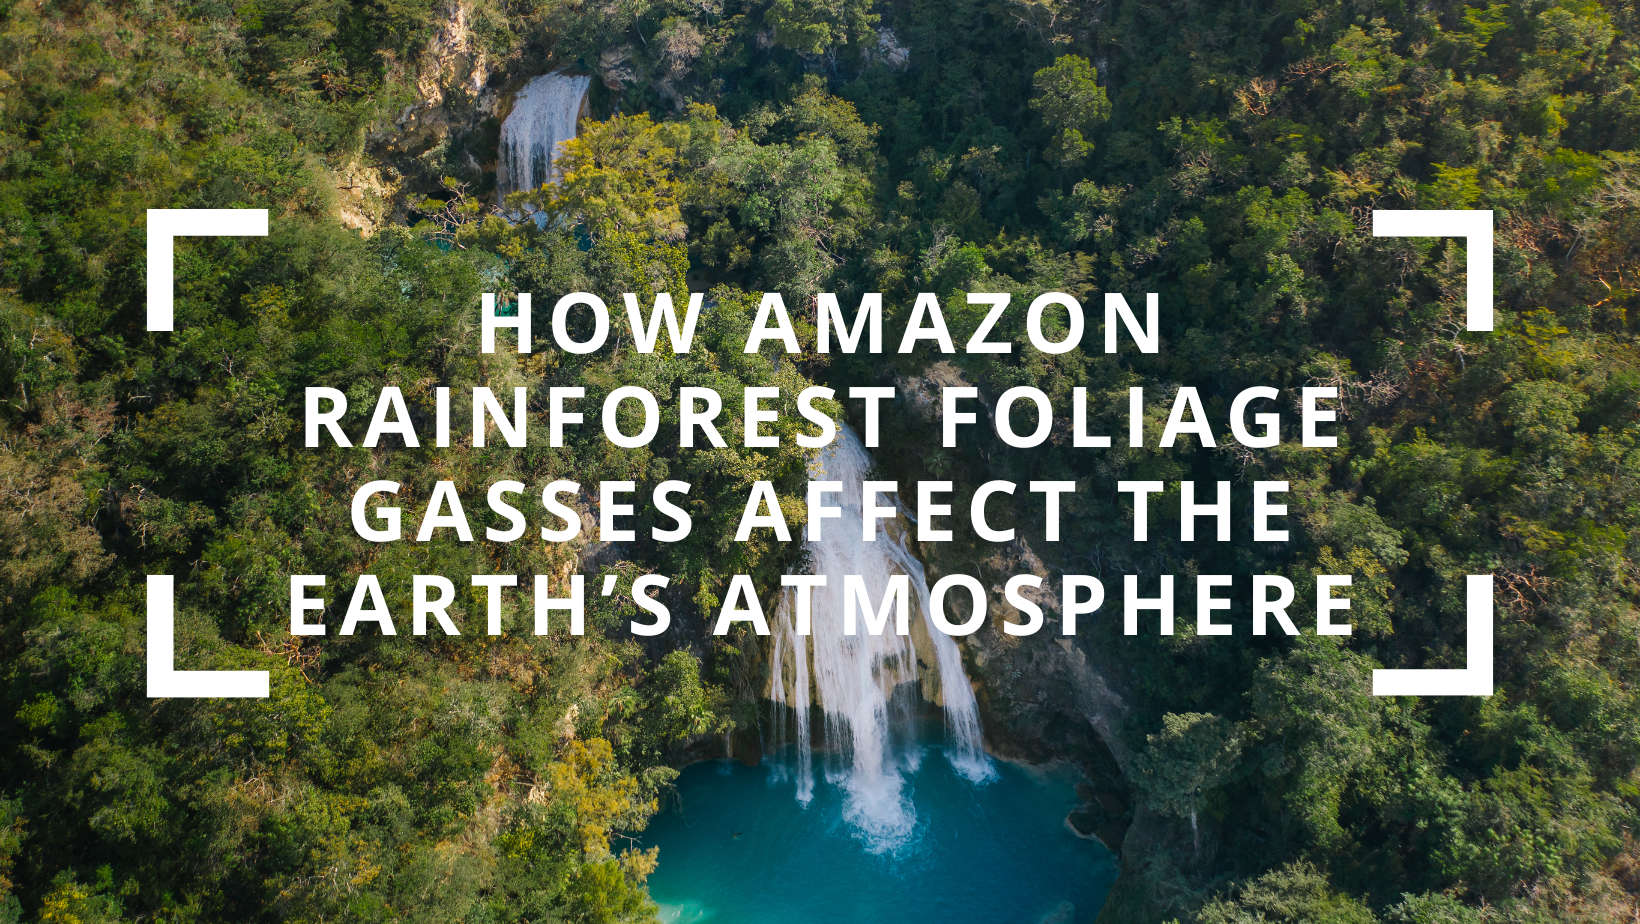 How Amazon Rainforest Foliage Gasses Affect the Earth’s Atmosphere